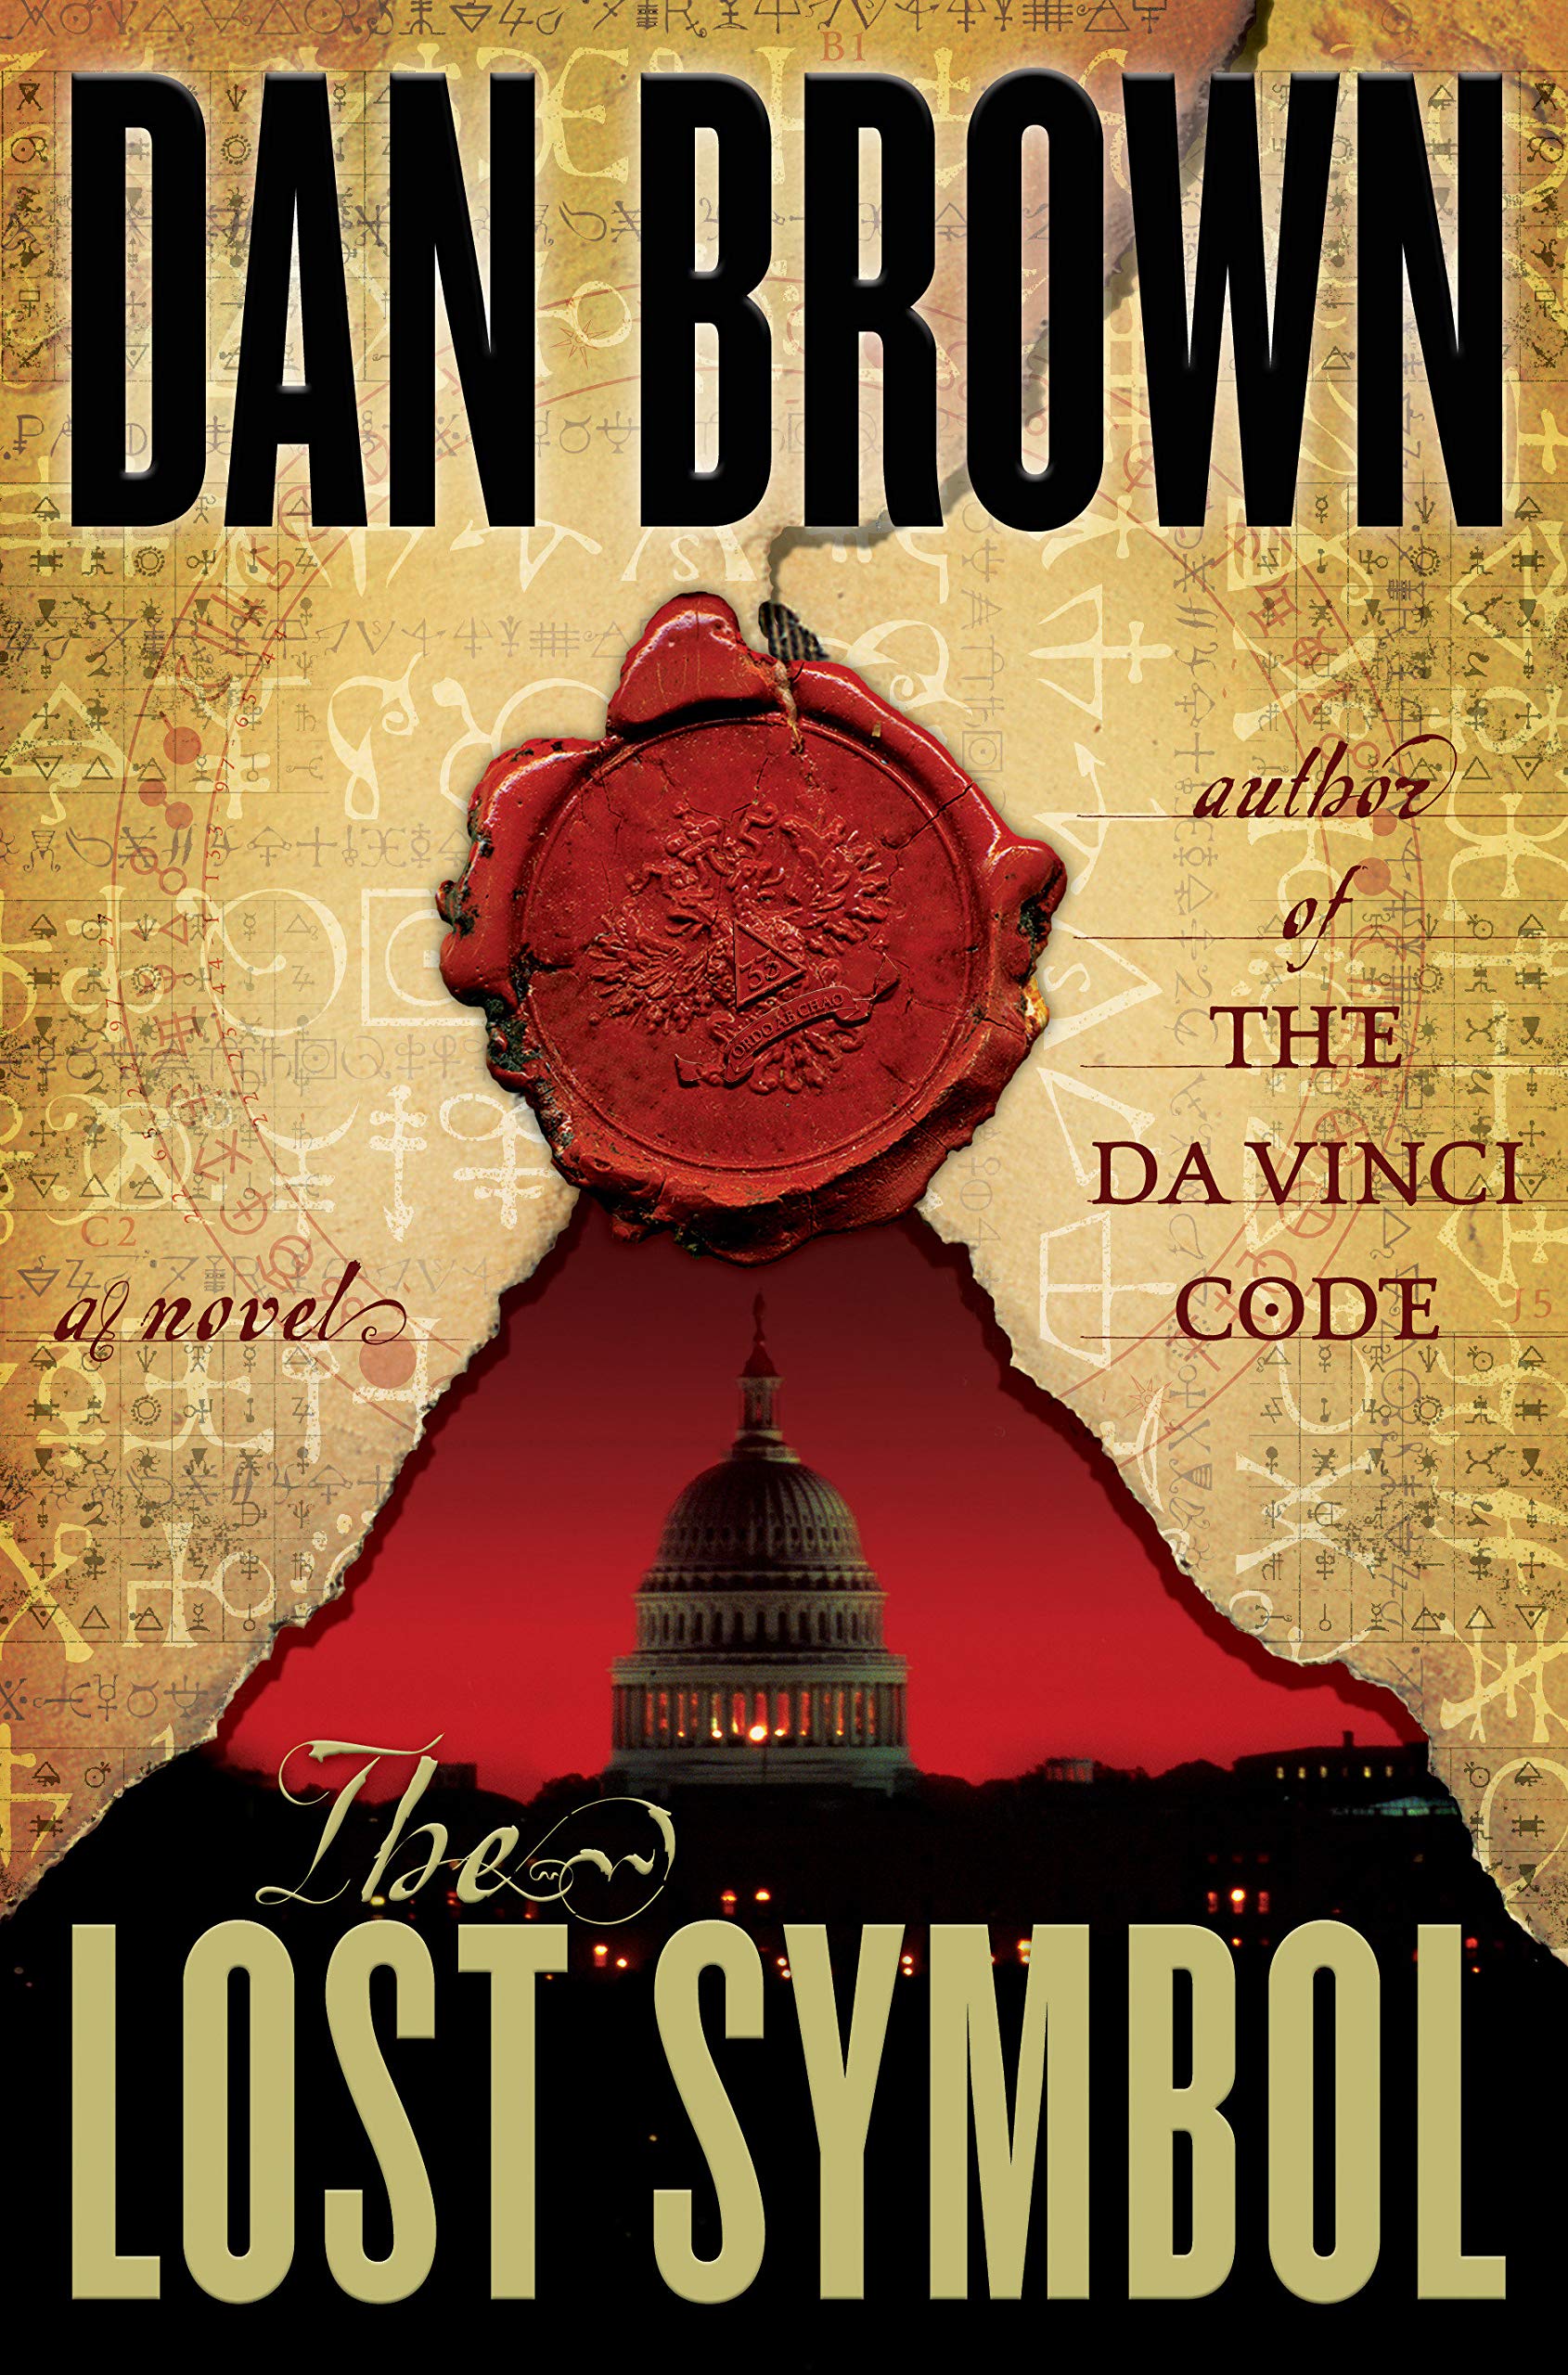 The cover for "The Lost Symbol" by Dan Brown, the third book in the Robert Langdon series.